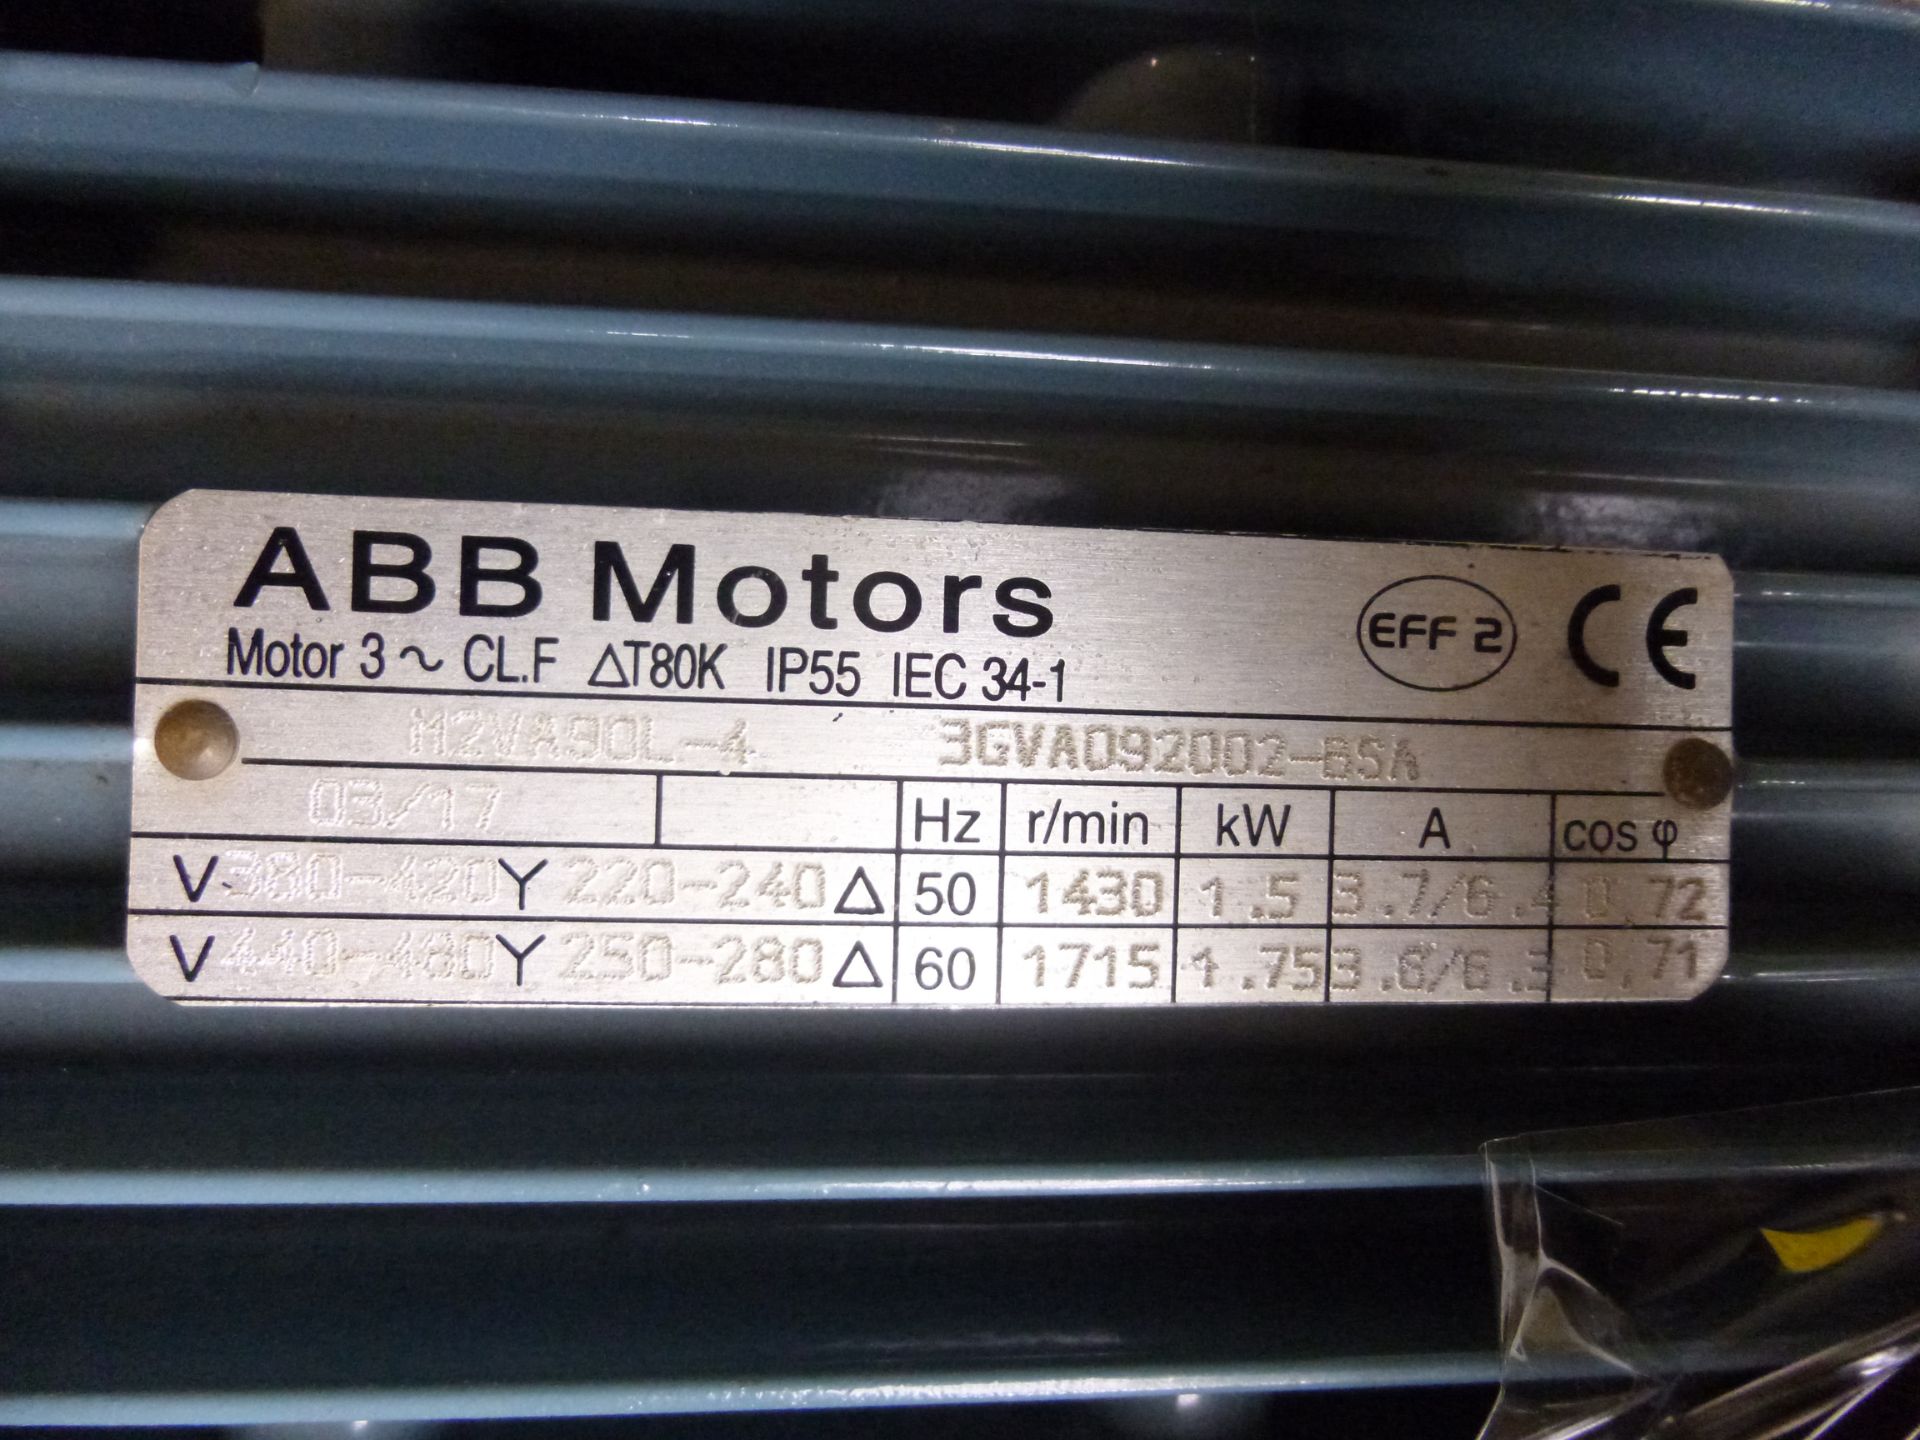 ABB Motors M2VA90L-4 3GVA092002-B5A, NEW fan cover on end is dented. Shipping can be prepared for - Image 2 of 2